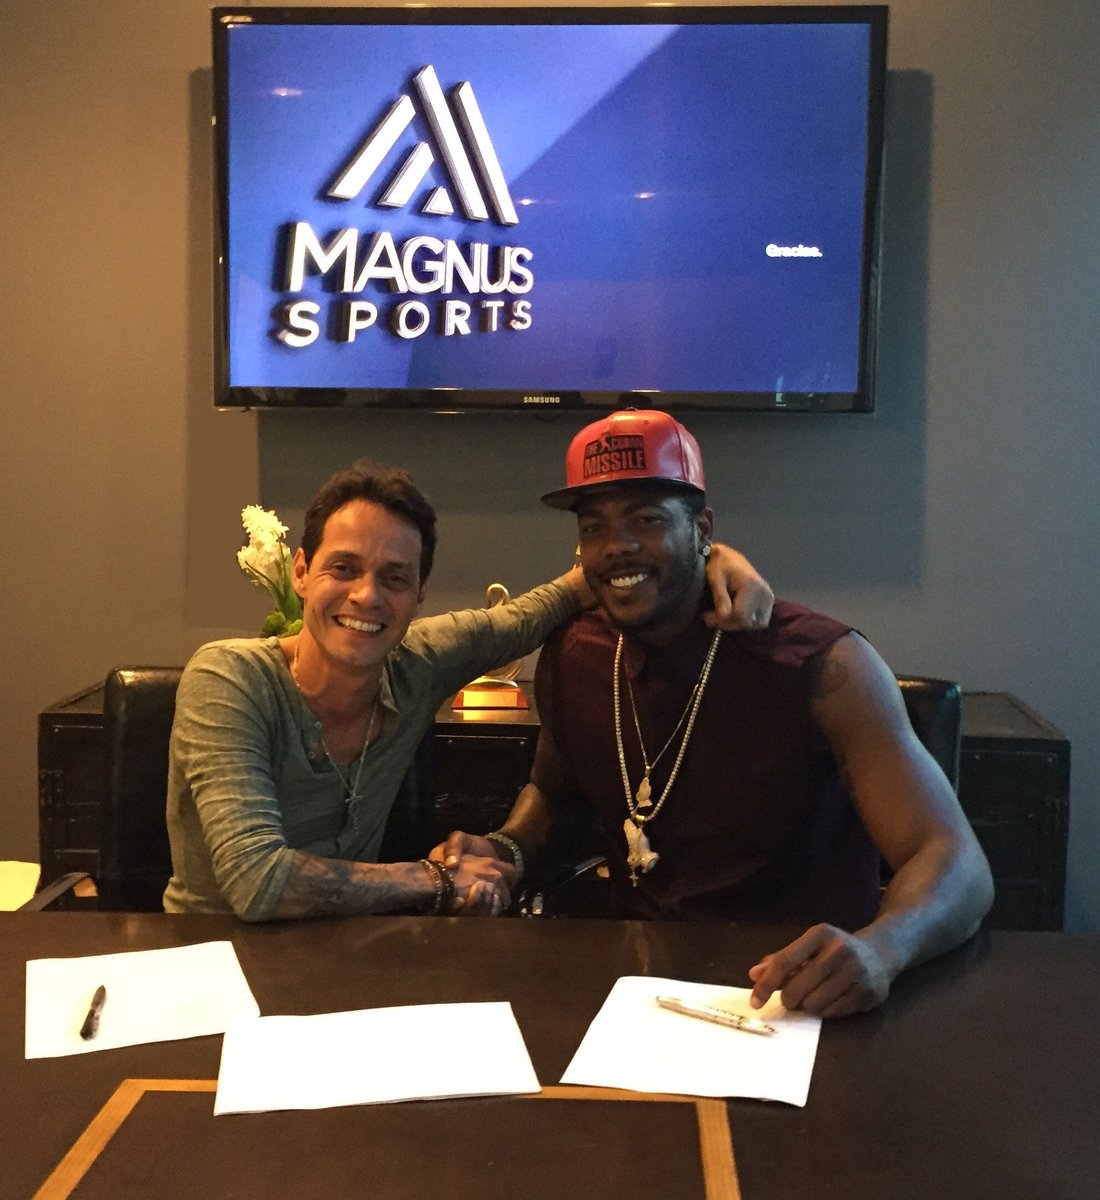 Announcing today the creation of MAGNUS Sports w/ the signing of @MLB pitcher @AChapman_105 https://t.co/EOzG7ckpcy https://t.co/Q92PAKJETD